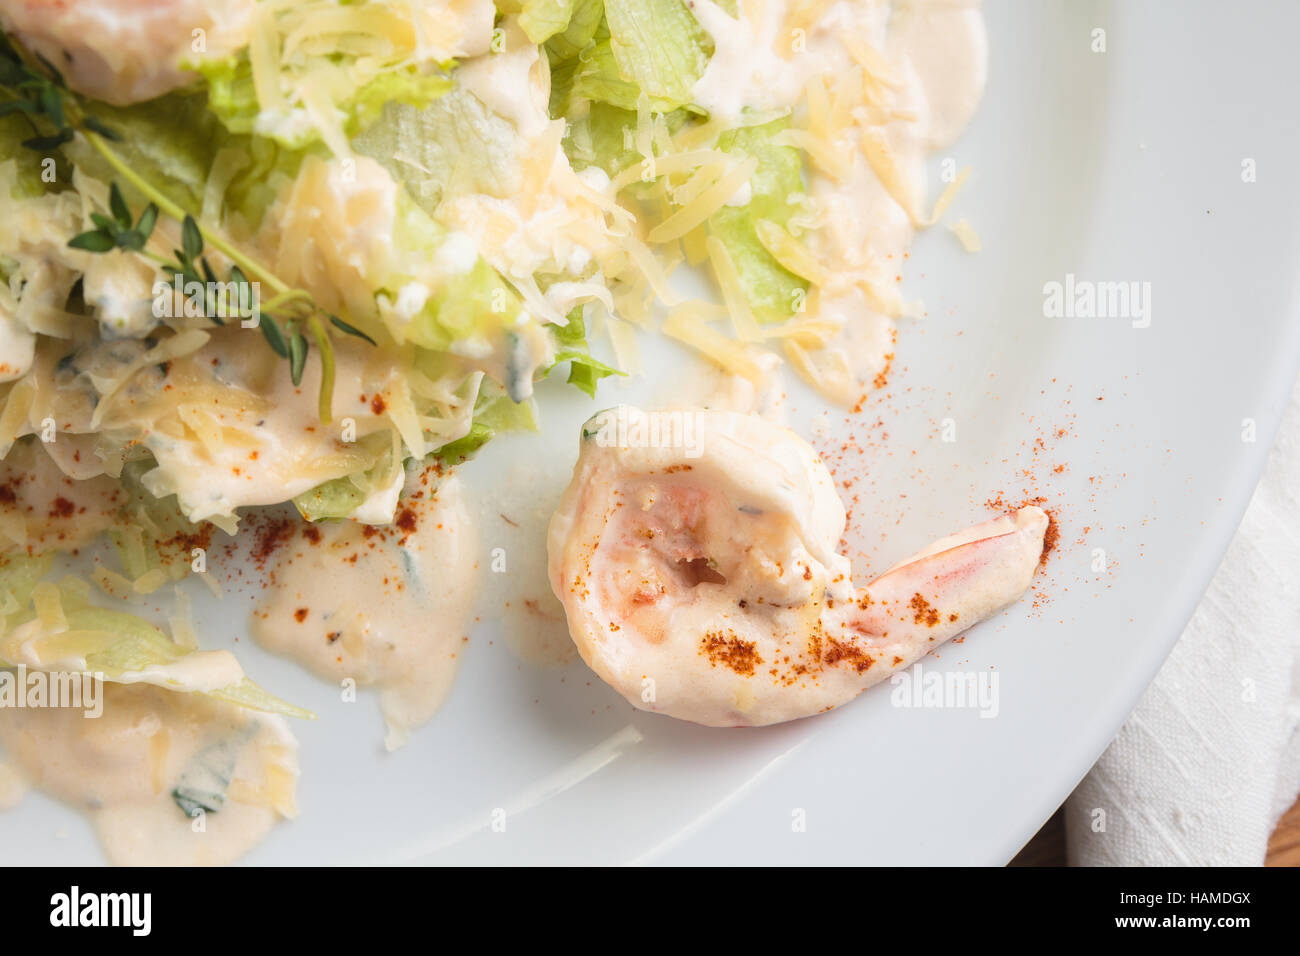 Concept: restaurant menus, healthy eating, homemade, gourmands, gluttony. White plate of salad with tiger prawns, flambeed in cognac, parmesan and cre Stock Photo